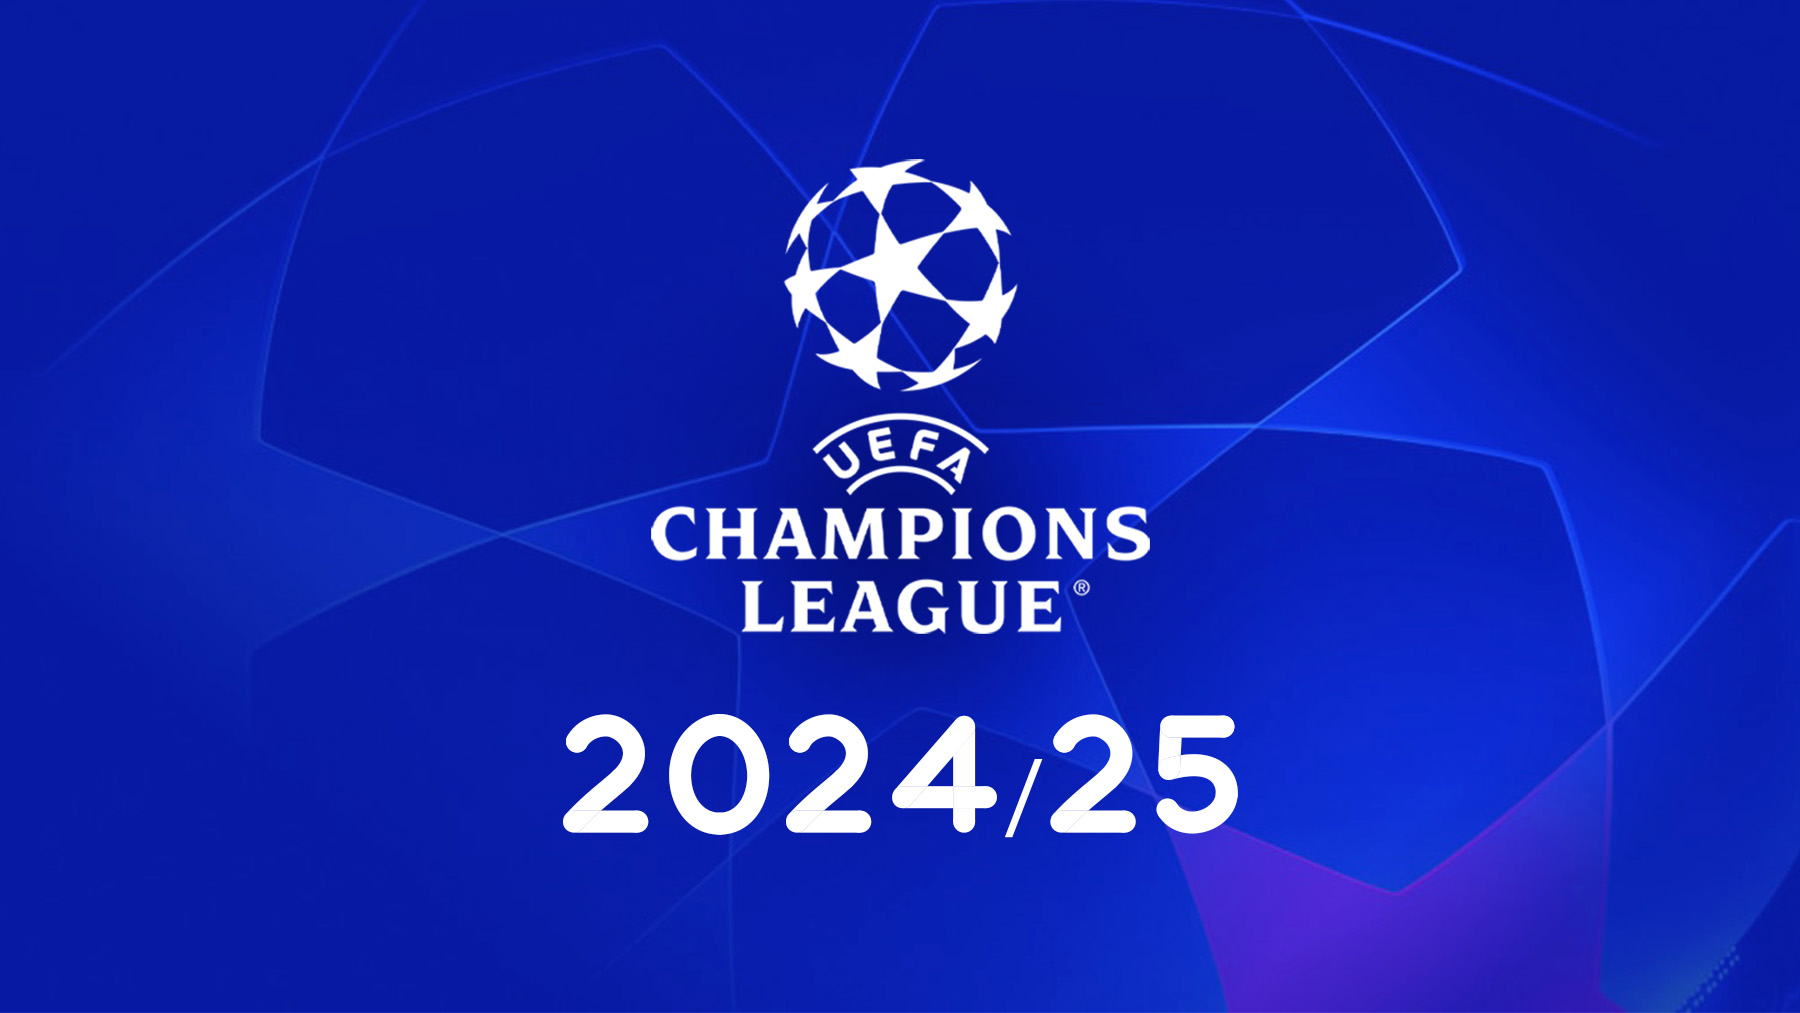 A complete guide to the UEFA Champions League 2024/25 tournament.